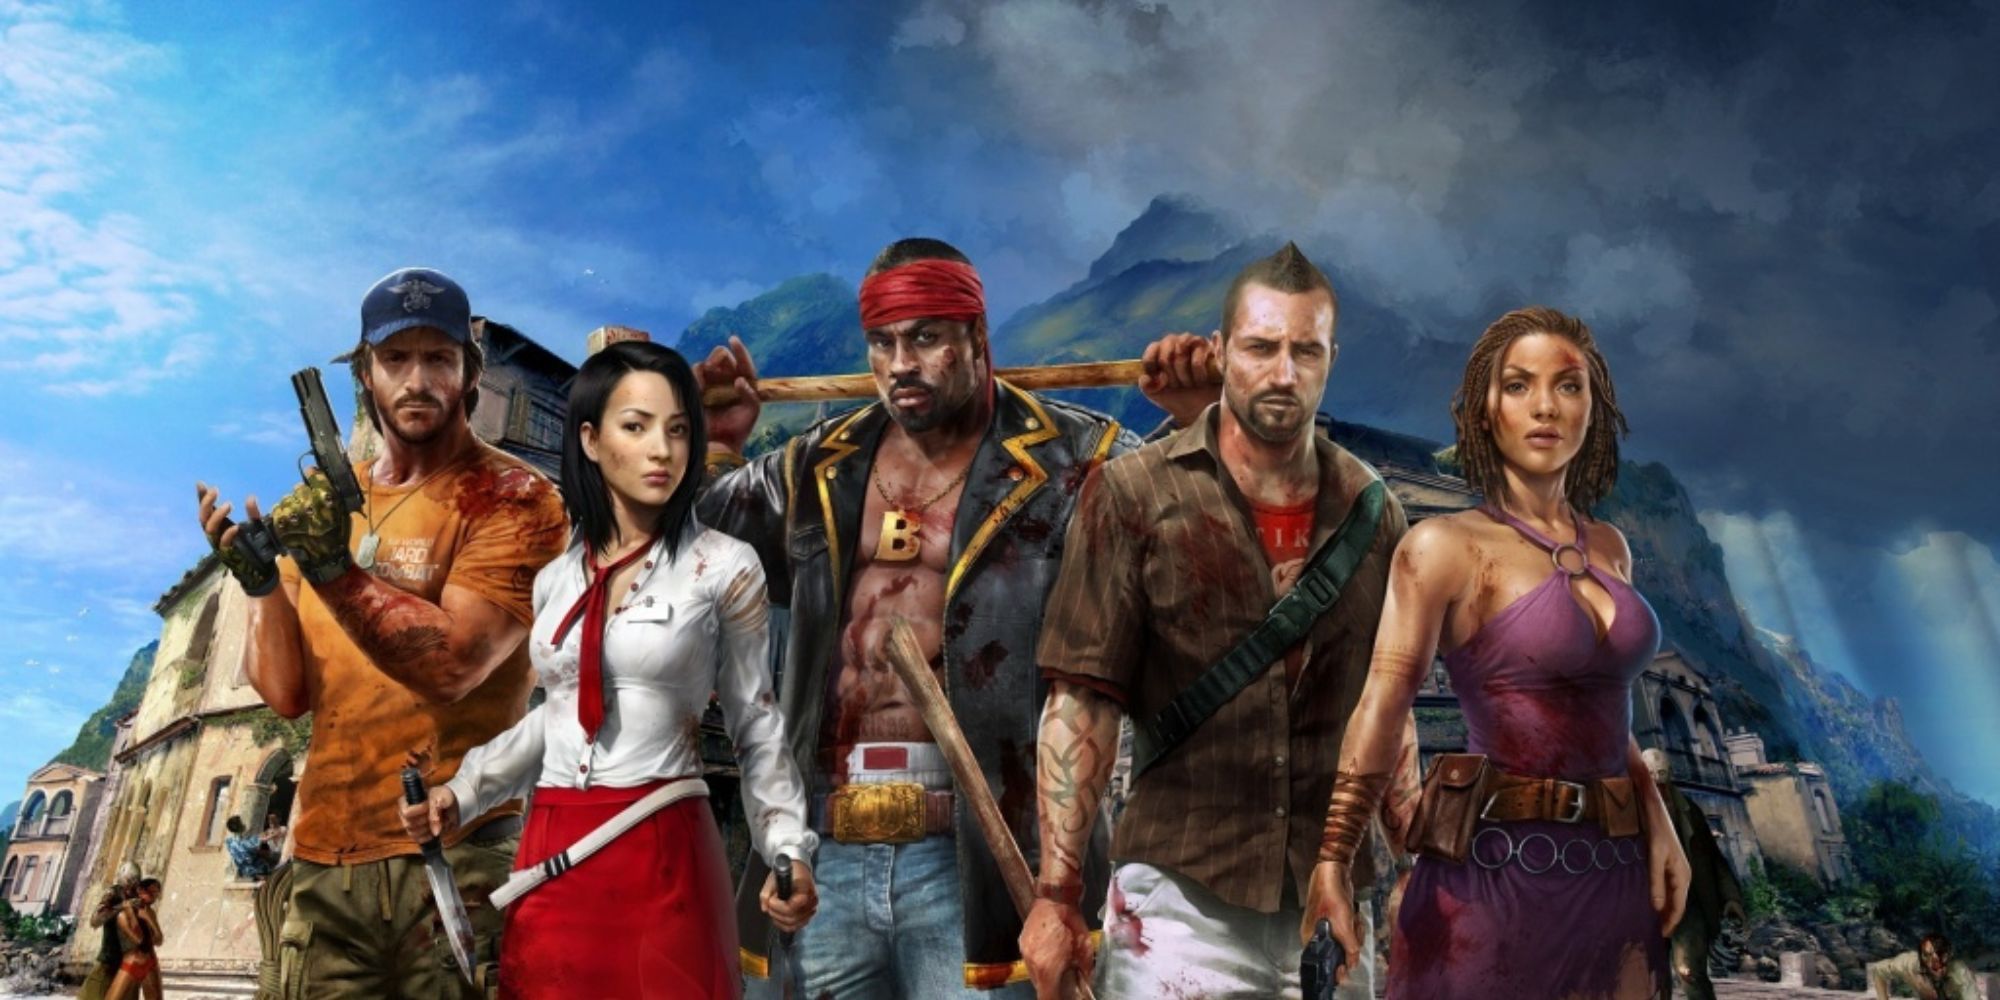 Sam B Dead Island 2 Dead Island 2 Reveals What Happened To The First Game's Playable Characters